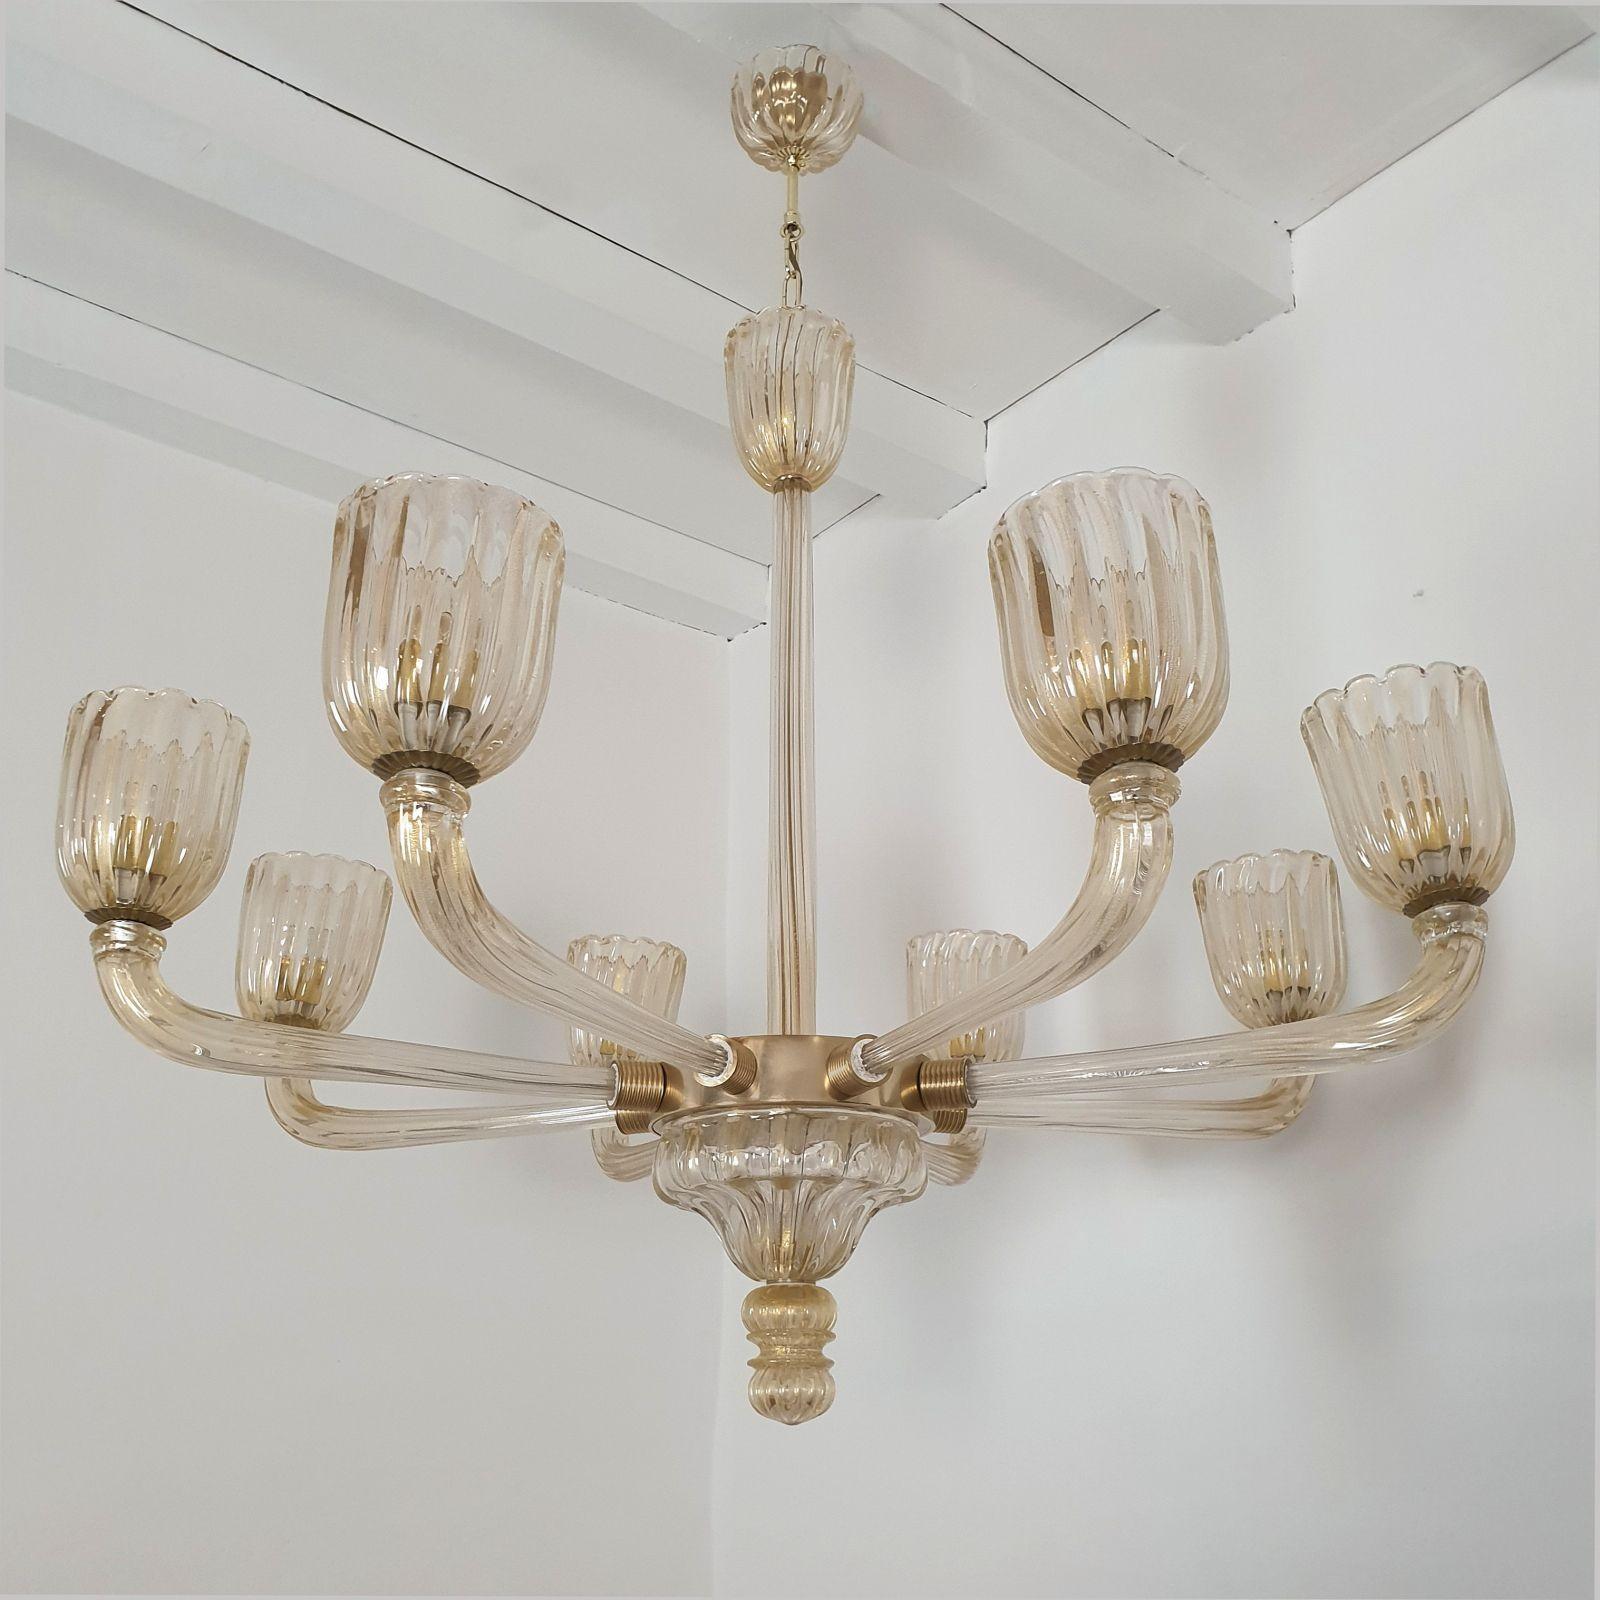 Large Mid Century Modern hand-blown Murano glass chandelier, attributed to Barovier, Italy 1970s.
The handmade Murano glass is thick, clear with real 24 carats gold flakes inclusion.
It make the glass translucent, and give a warm glow of light.
The